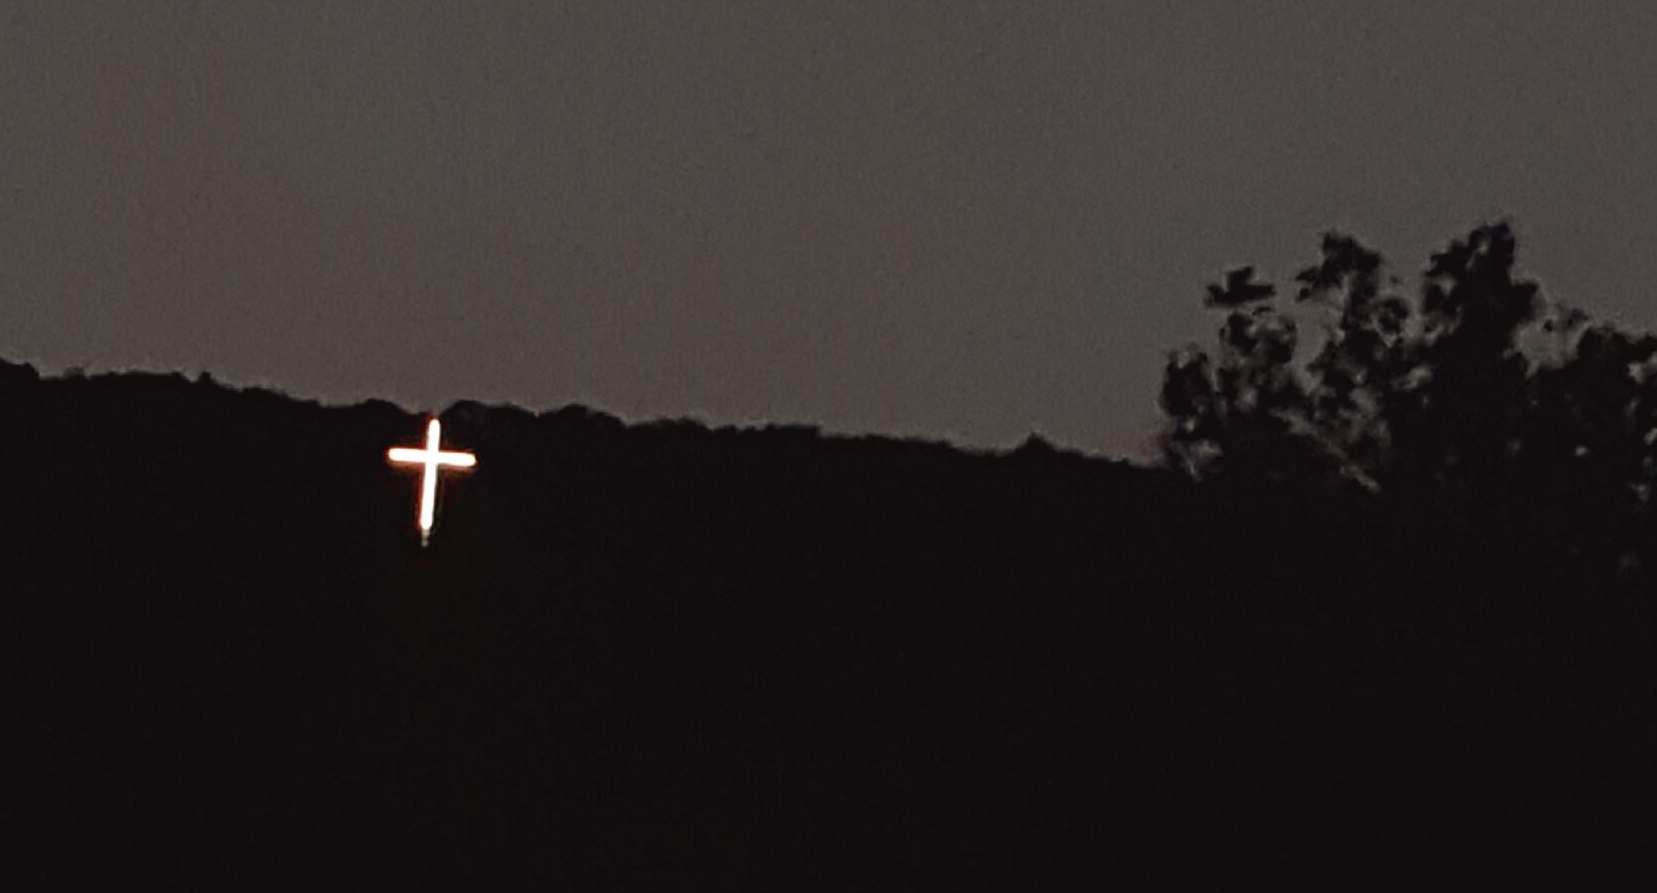 A picture of a silhouetted mountainscape at twilight. A bright cross is illuminated against the dark.